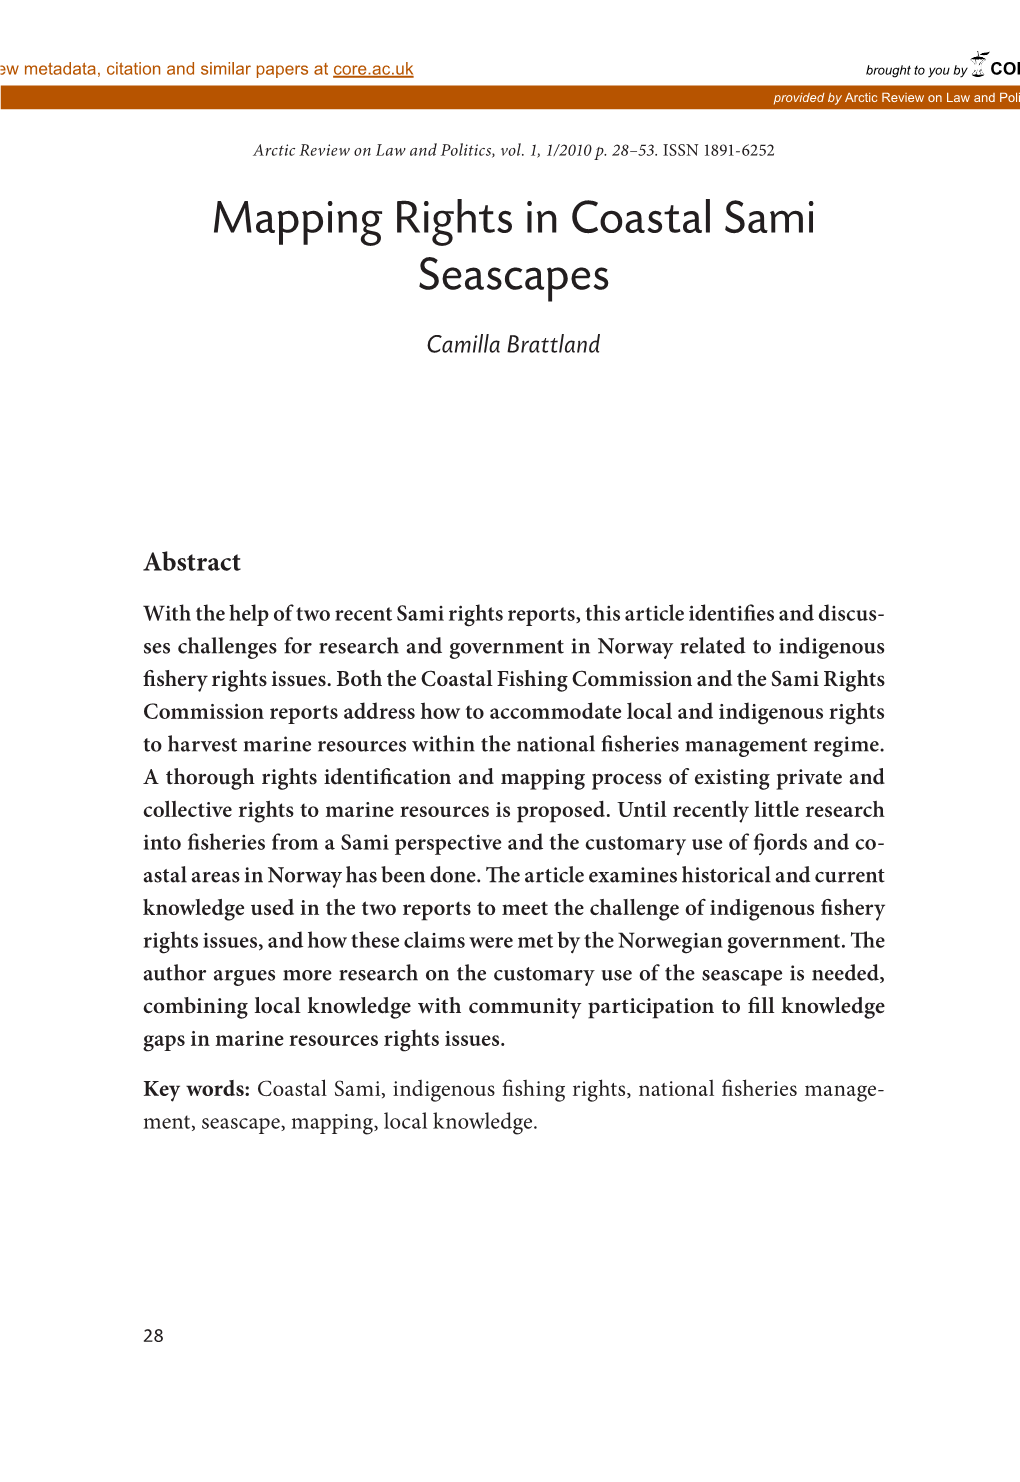 Mapping Rights in Coastal Sami Seascapes